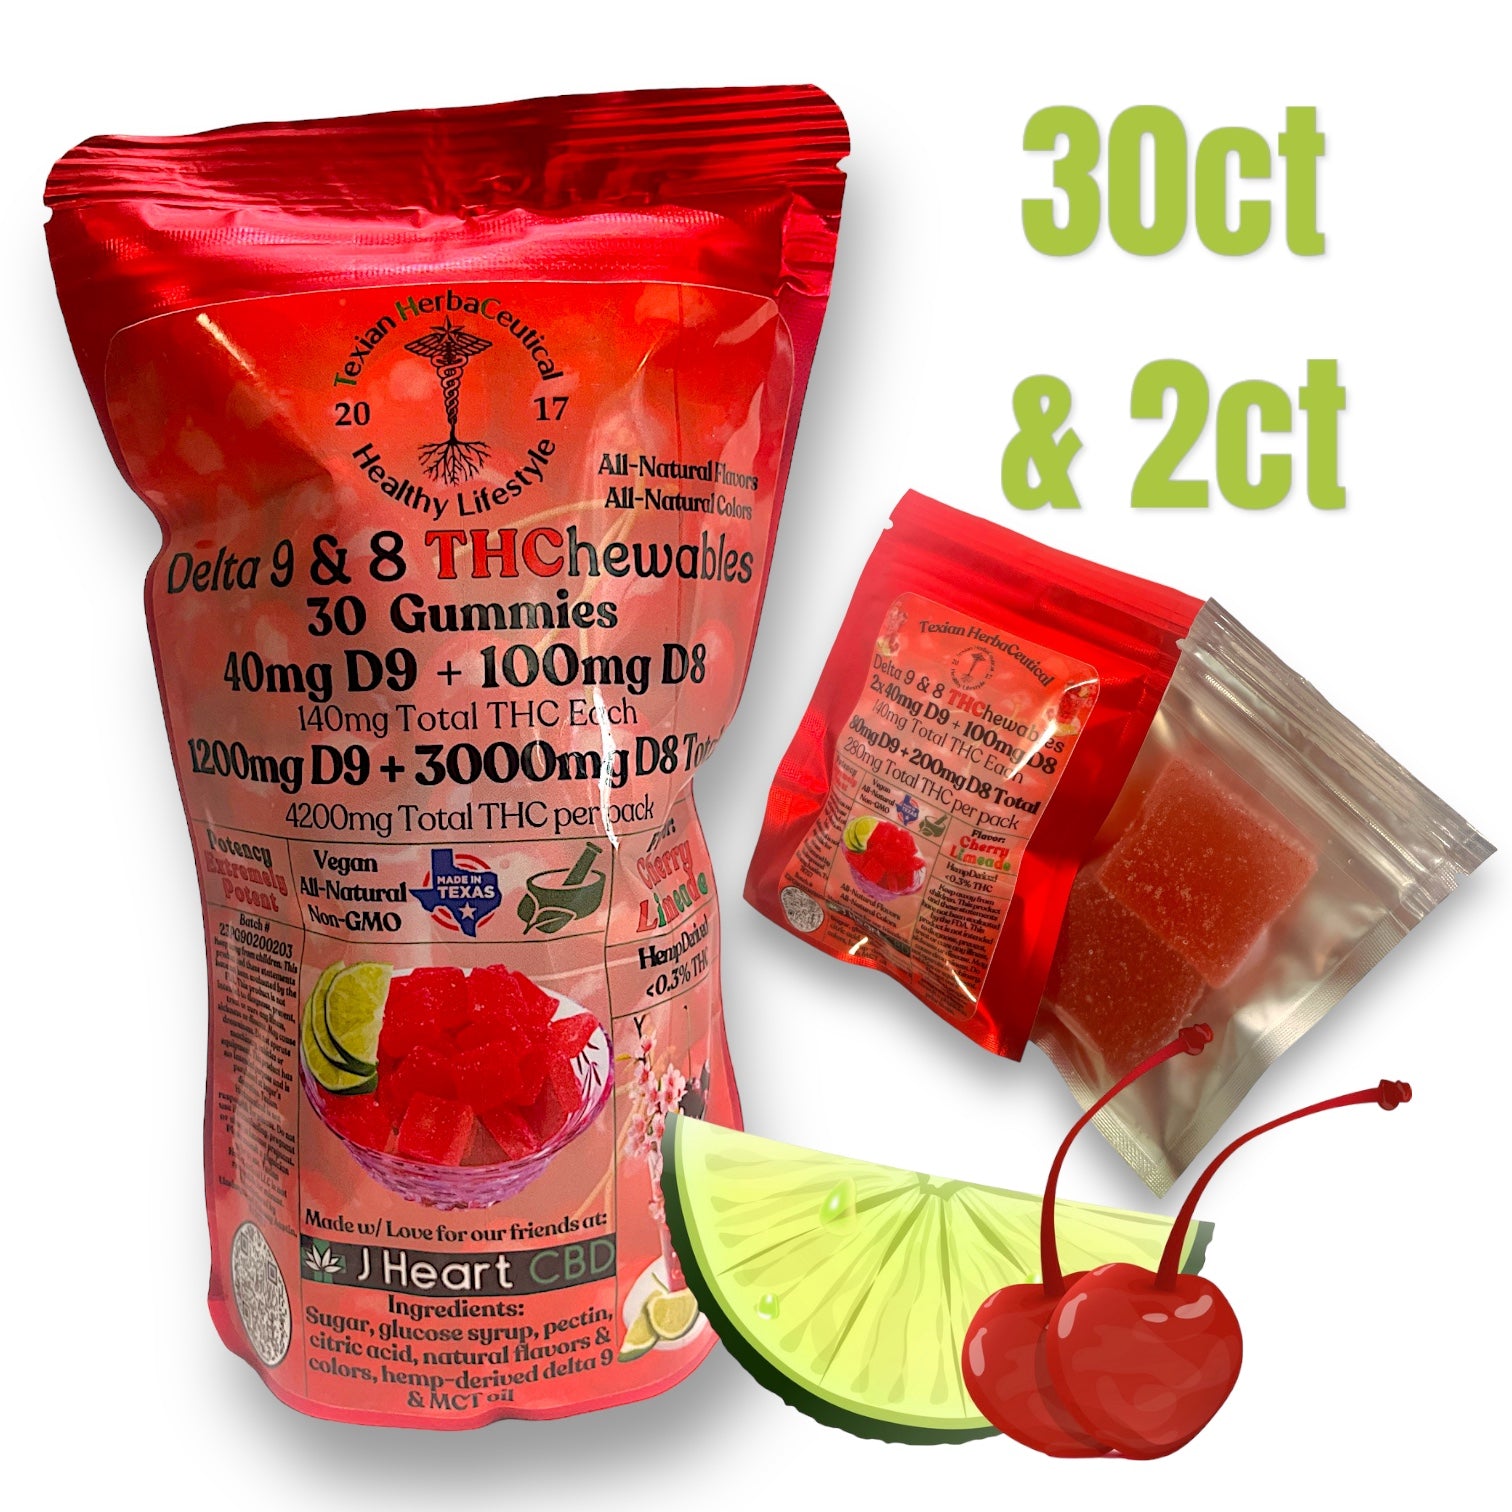 Texian Herbaceutical 40mg Delta 9 THC ( + 100mg Delta 8 THC) Cherry Limeade Gummies - 2ct & 30ct HIGH POTENCY